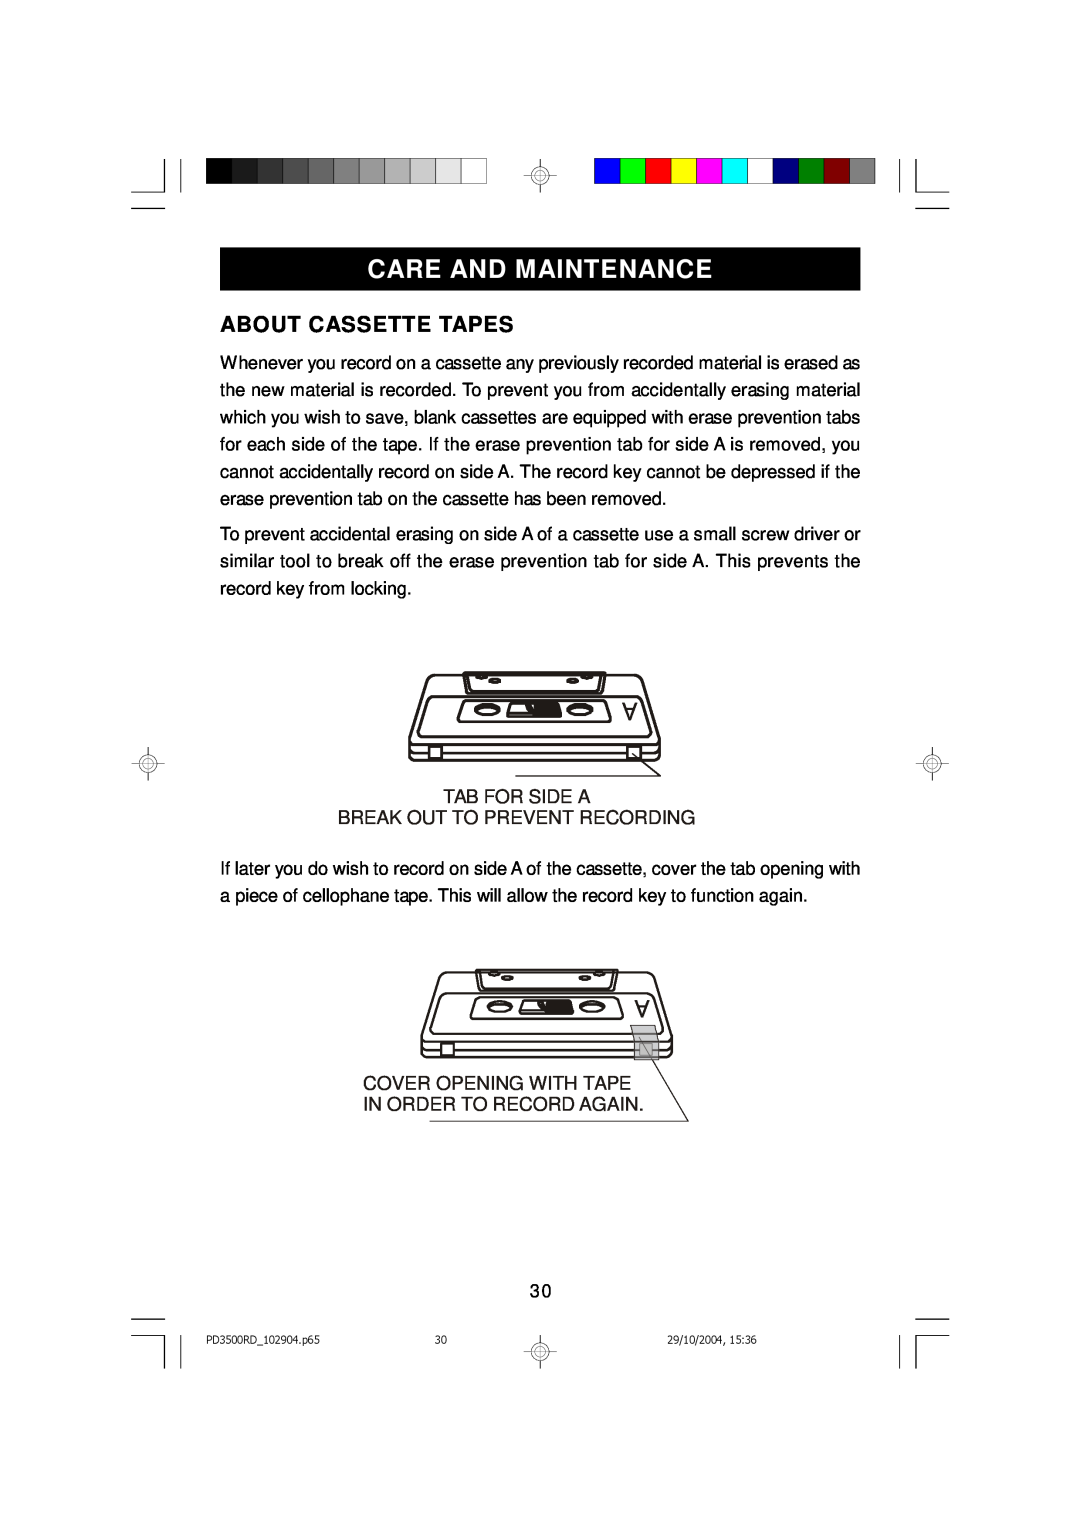 Emerson PD3500RD owner manual Care And Maintenance, About Cassette Tapes, Tab For Side A Break Out To Prevent Recording 